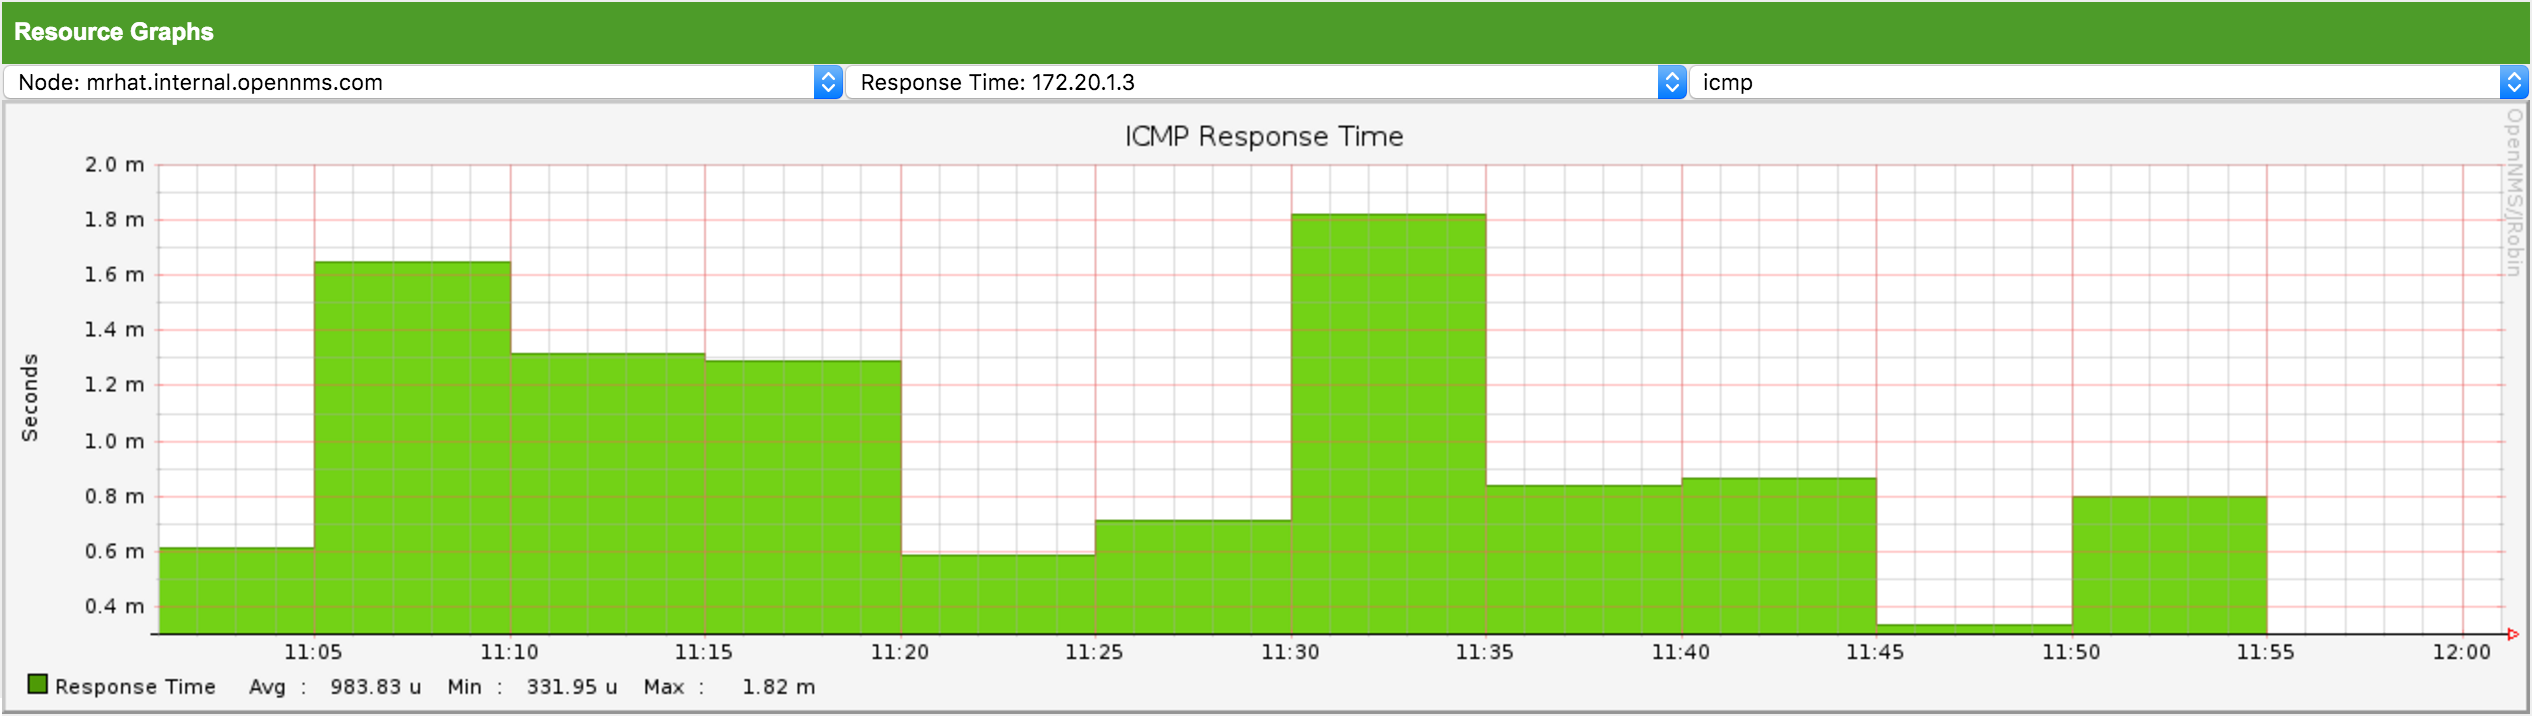 Horizon UI displaying a resource graphs component, showing ICMP response time data from 11:00 a.m. to 12:00 p.m.